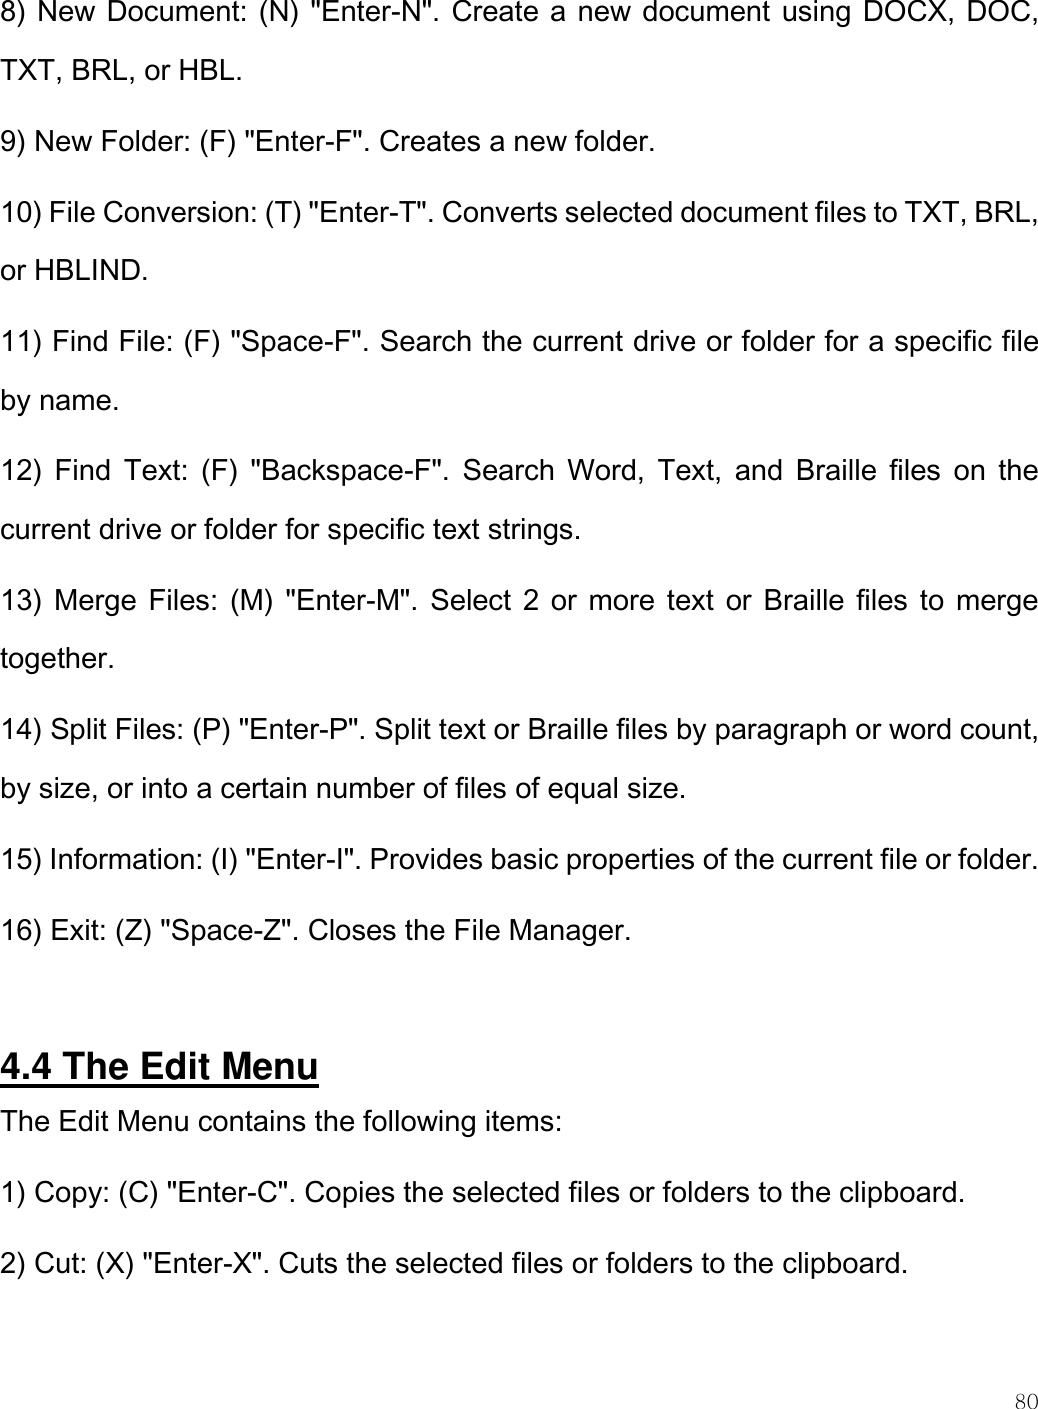    80  8) New Document: (N) &quot;Enter-N&quot;. Create a new document using DOCX, DOC, TXT, BRL, or HBL. 9) New Folder: (F) &quot;Enter-F&quot;. Creates a new folder. 10) File Conversion: (T) &quot;Enter-T&quot;. Converts selected document files to TXT, BRL, or HBLIND. 11) Find File: (F) &quot;Space-F&quot;. Search the current drive or folder for a specific file by name. 12)  Find Text:  (F)  &quot;Backspace-F&quot;.  Search  Word,  Text,  and  Braille  files  on  the current drive or folder for specific text strings.  13) Merge Files: (M) &quot;Enter-M&quot;. Select 2 or  more text or Braille files to merge together. 14) Split Files: (P) &quot;Enter-P&quot;. Split text or Braille files by paragraph or word count, by size, or into a certain number of files of equal size.  15) Information: (I) &quot;Enter-I&quot;. Provides basic properties of the current file or folder. 16) Exit: (Z) &quot;Space-Z&quot;. Closes the File Manager.   4.4 The Edit Menu The Edit Menu contains the following items: 1) Copy: (C) &quot;Enter-C&quot;. Copies the selected files or folders to the clipboard. 2) Cut: (X) &quot;Enter-X&quot;. Cuts the selected files or folders to the clipboard.  